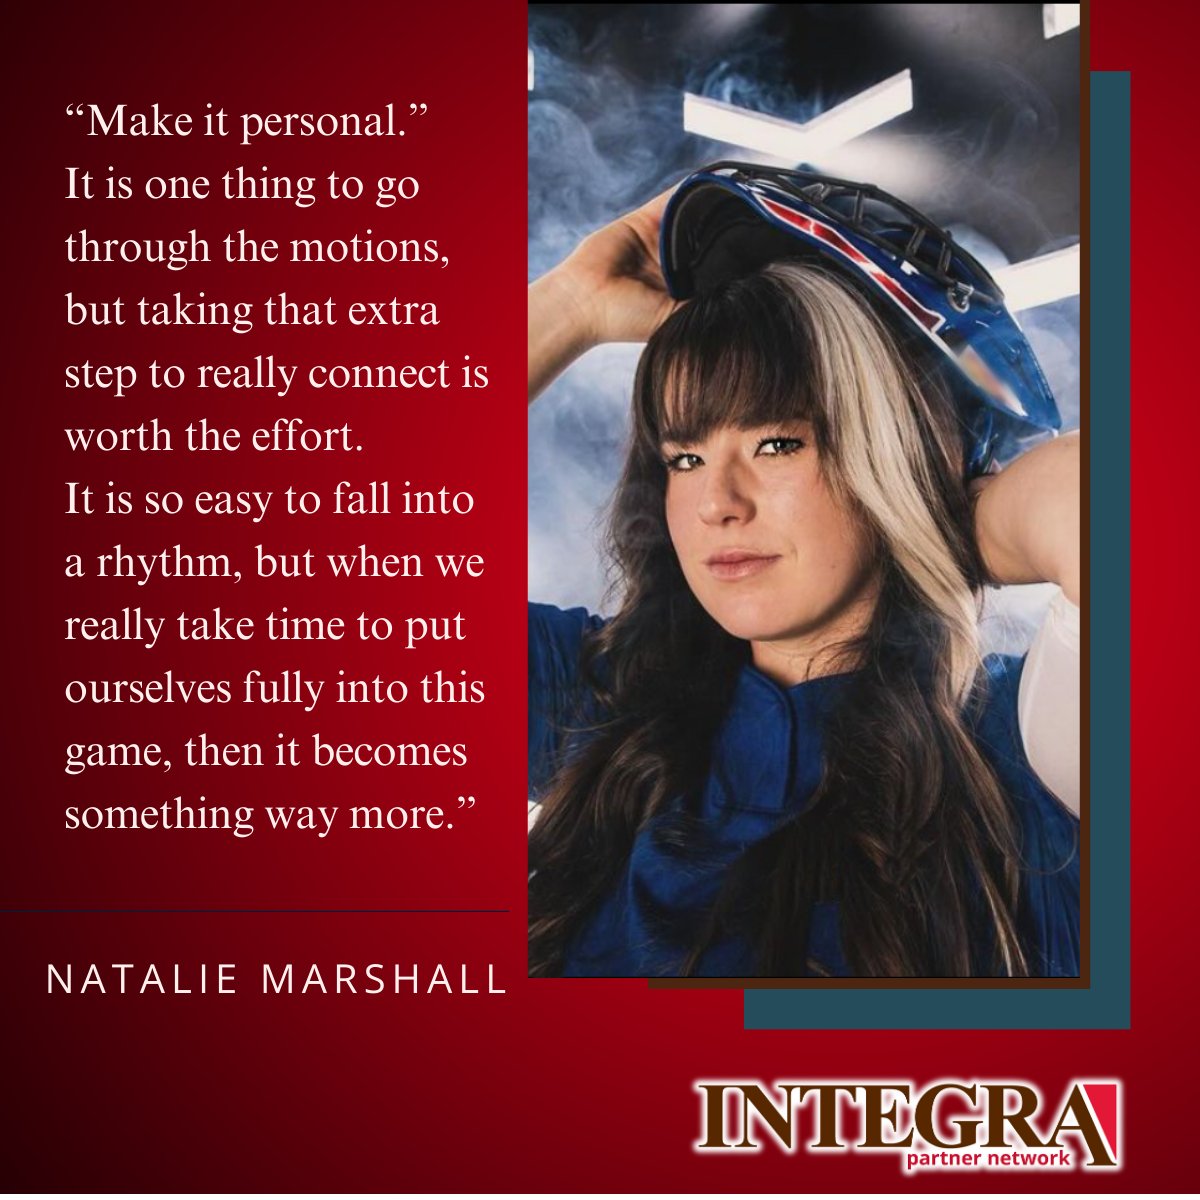 Meet The Integra Athlete: Natalie Marshall
Classification: Jr
Major: Psychology
Community Service Initiative: Building one-on-one connections 
Home State: CA
Follow on Insta @Natalieam18
#insurance #independentagent #softball #collegesoftball #insuranceagent #insuranceagency